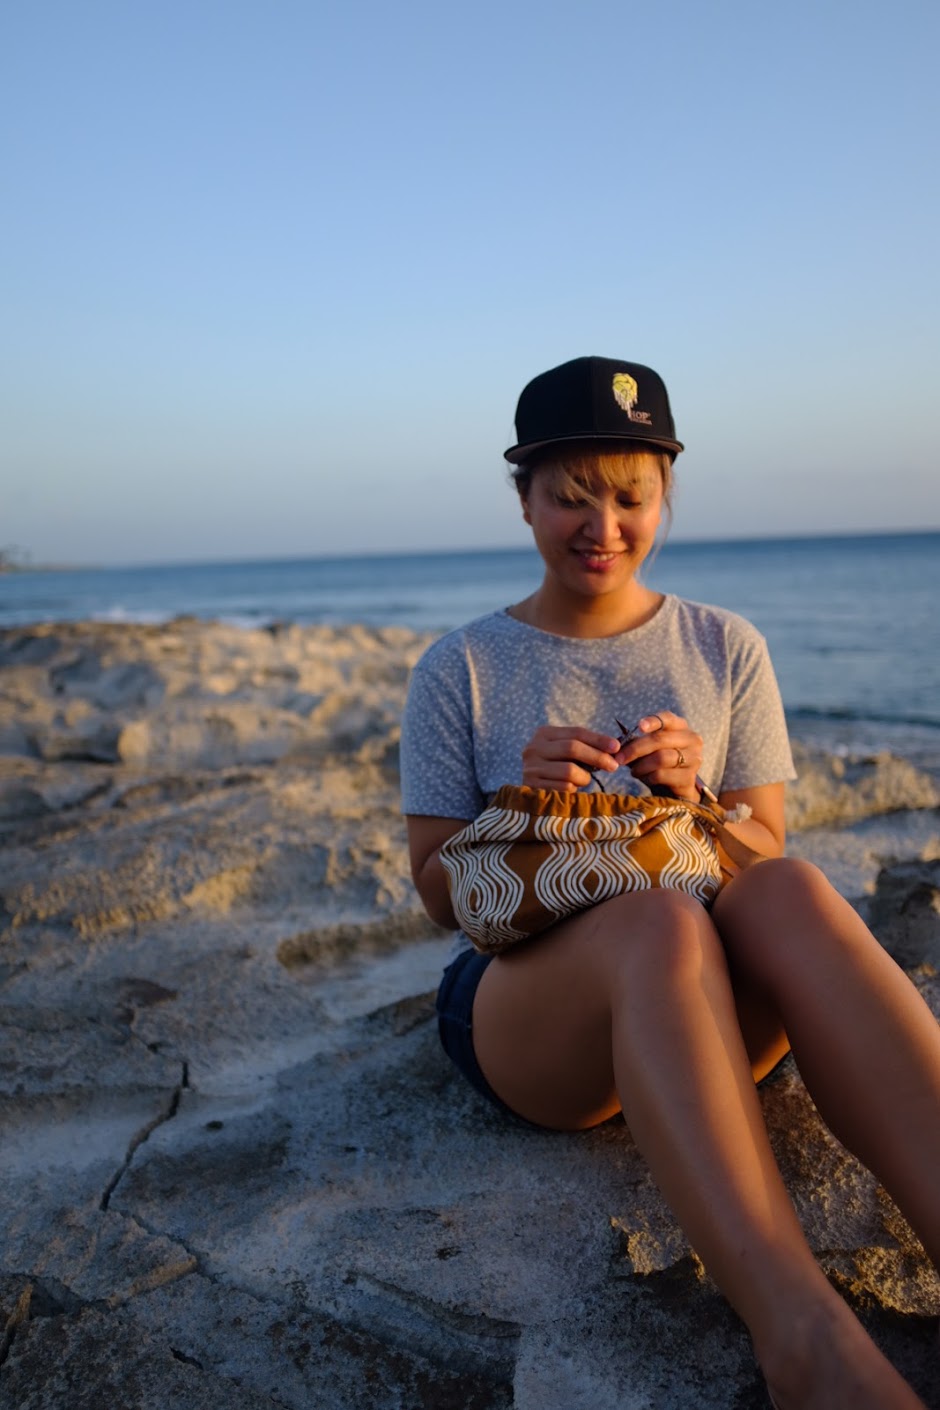 Photo of Arisa knitting on the beach on April 27, 2019.